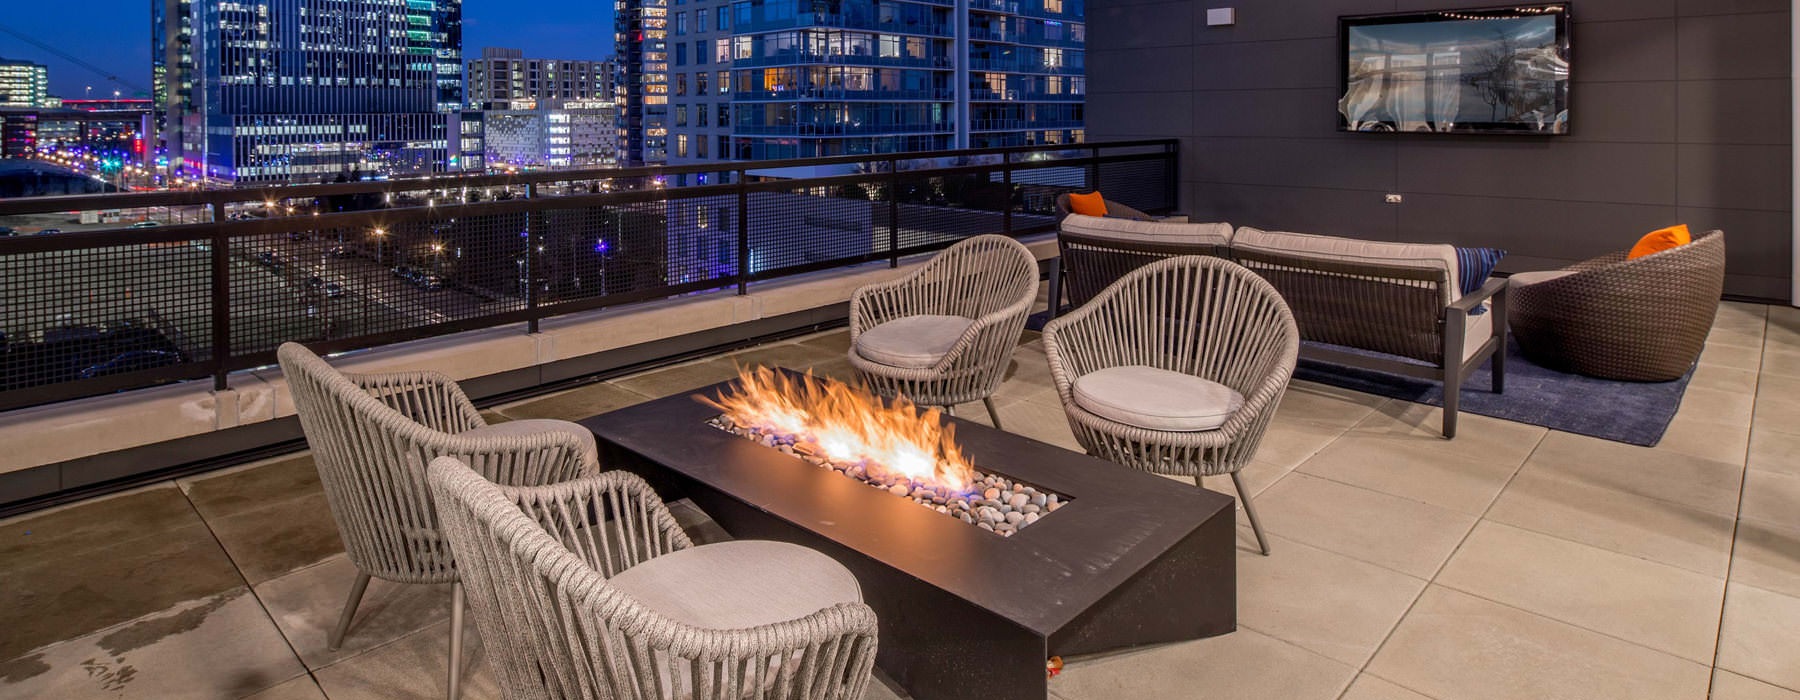 chairs around rooftop fire pit with city views